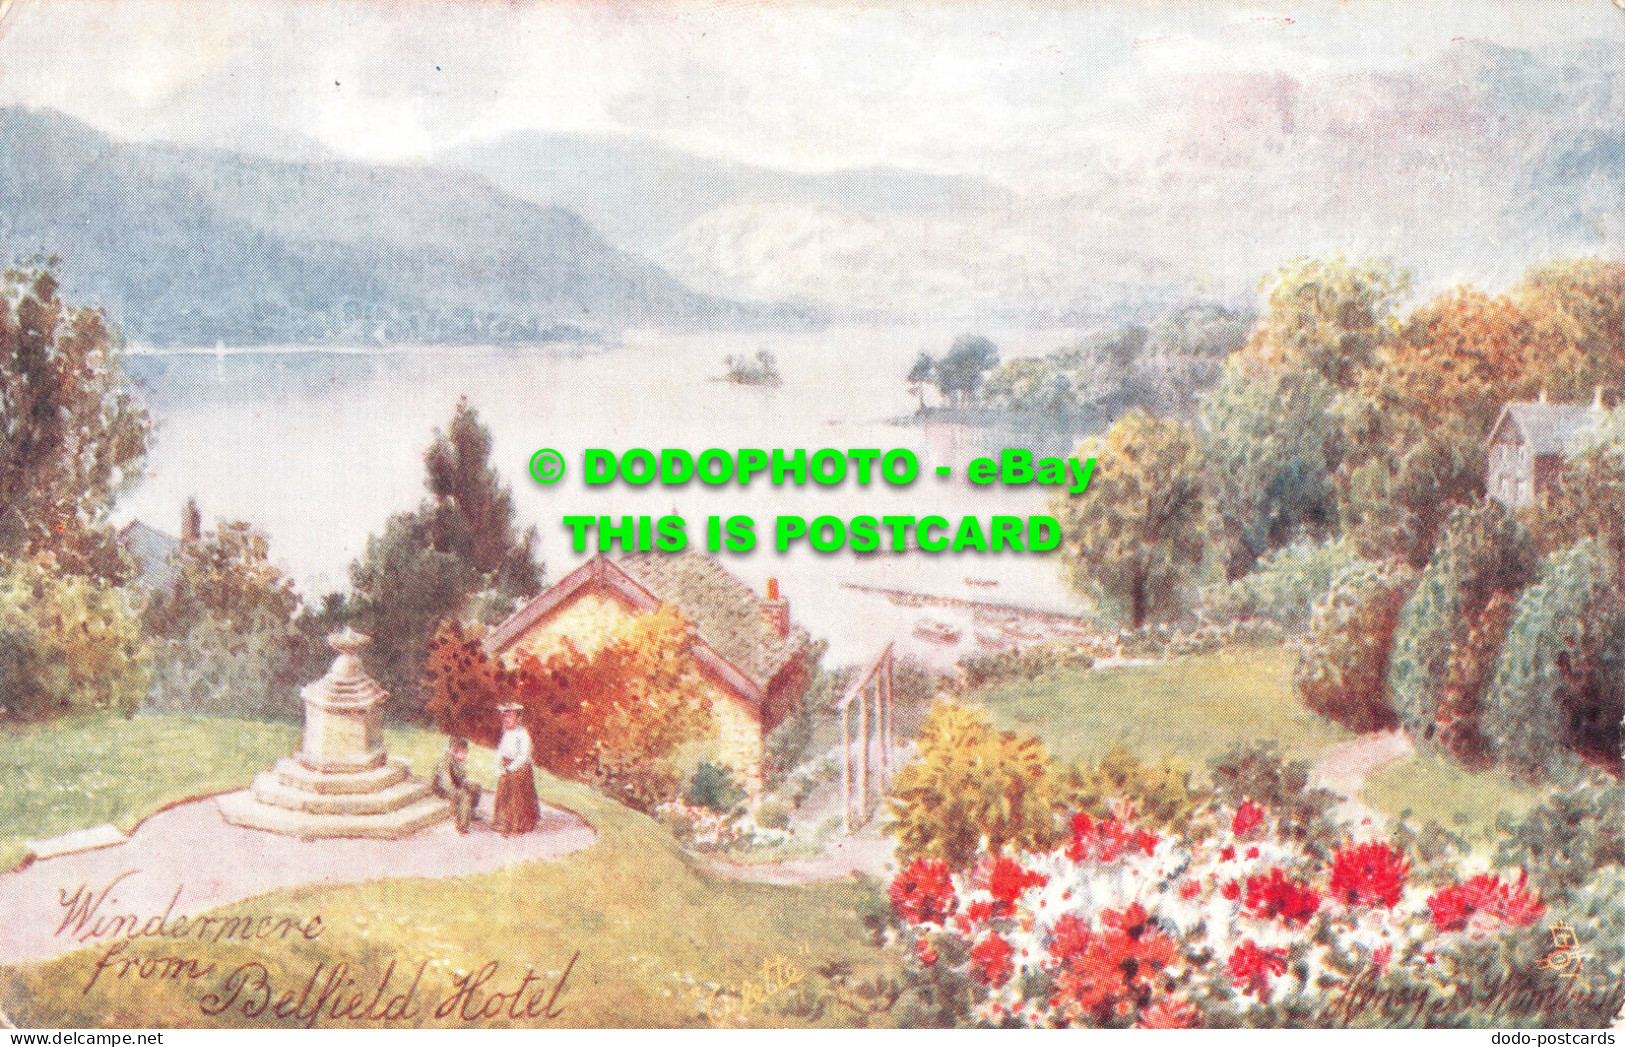 R550046 Windermere From Belfield Hotel. Picturesque English Lakes. H. B. Wimbush - World